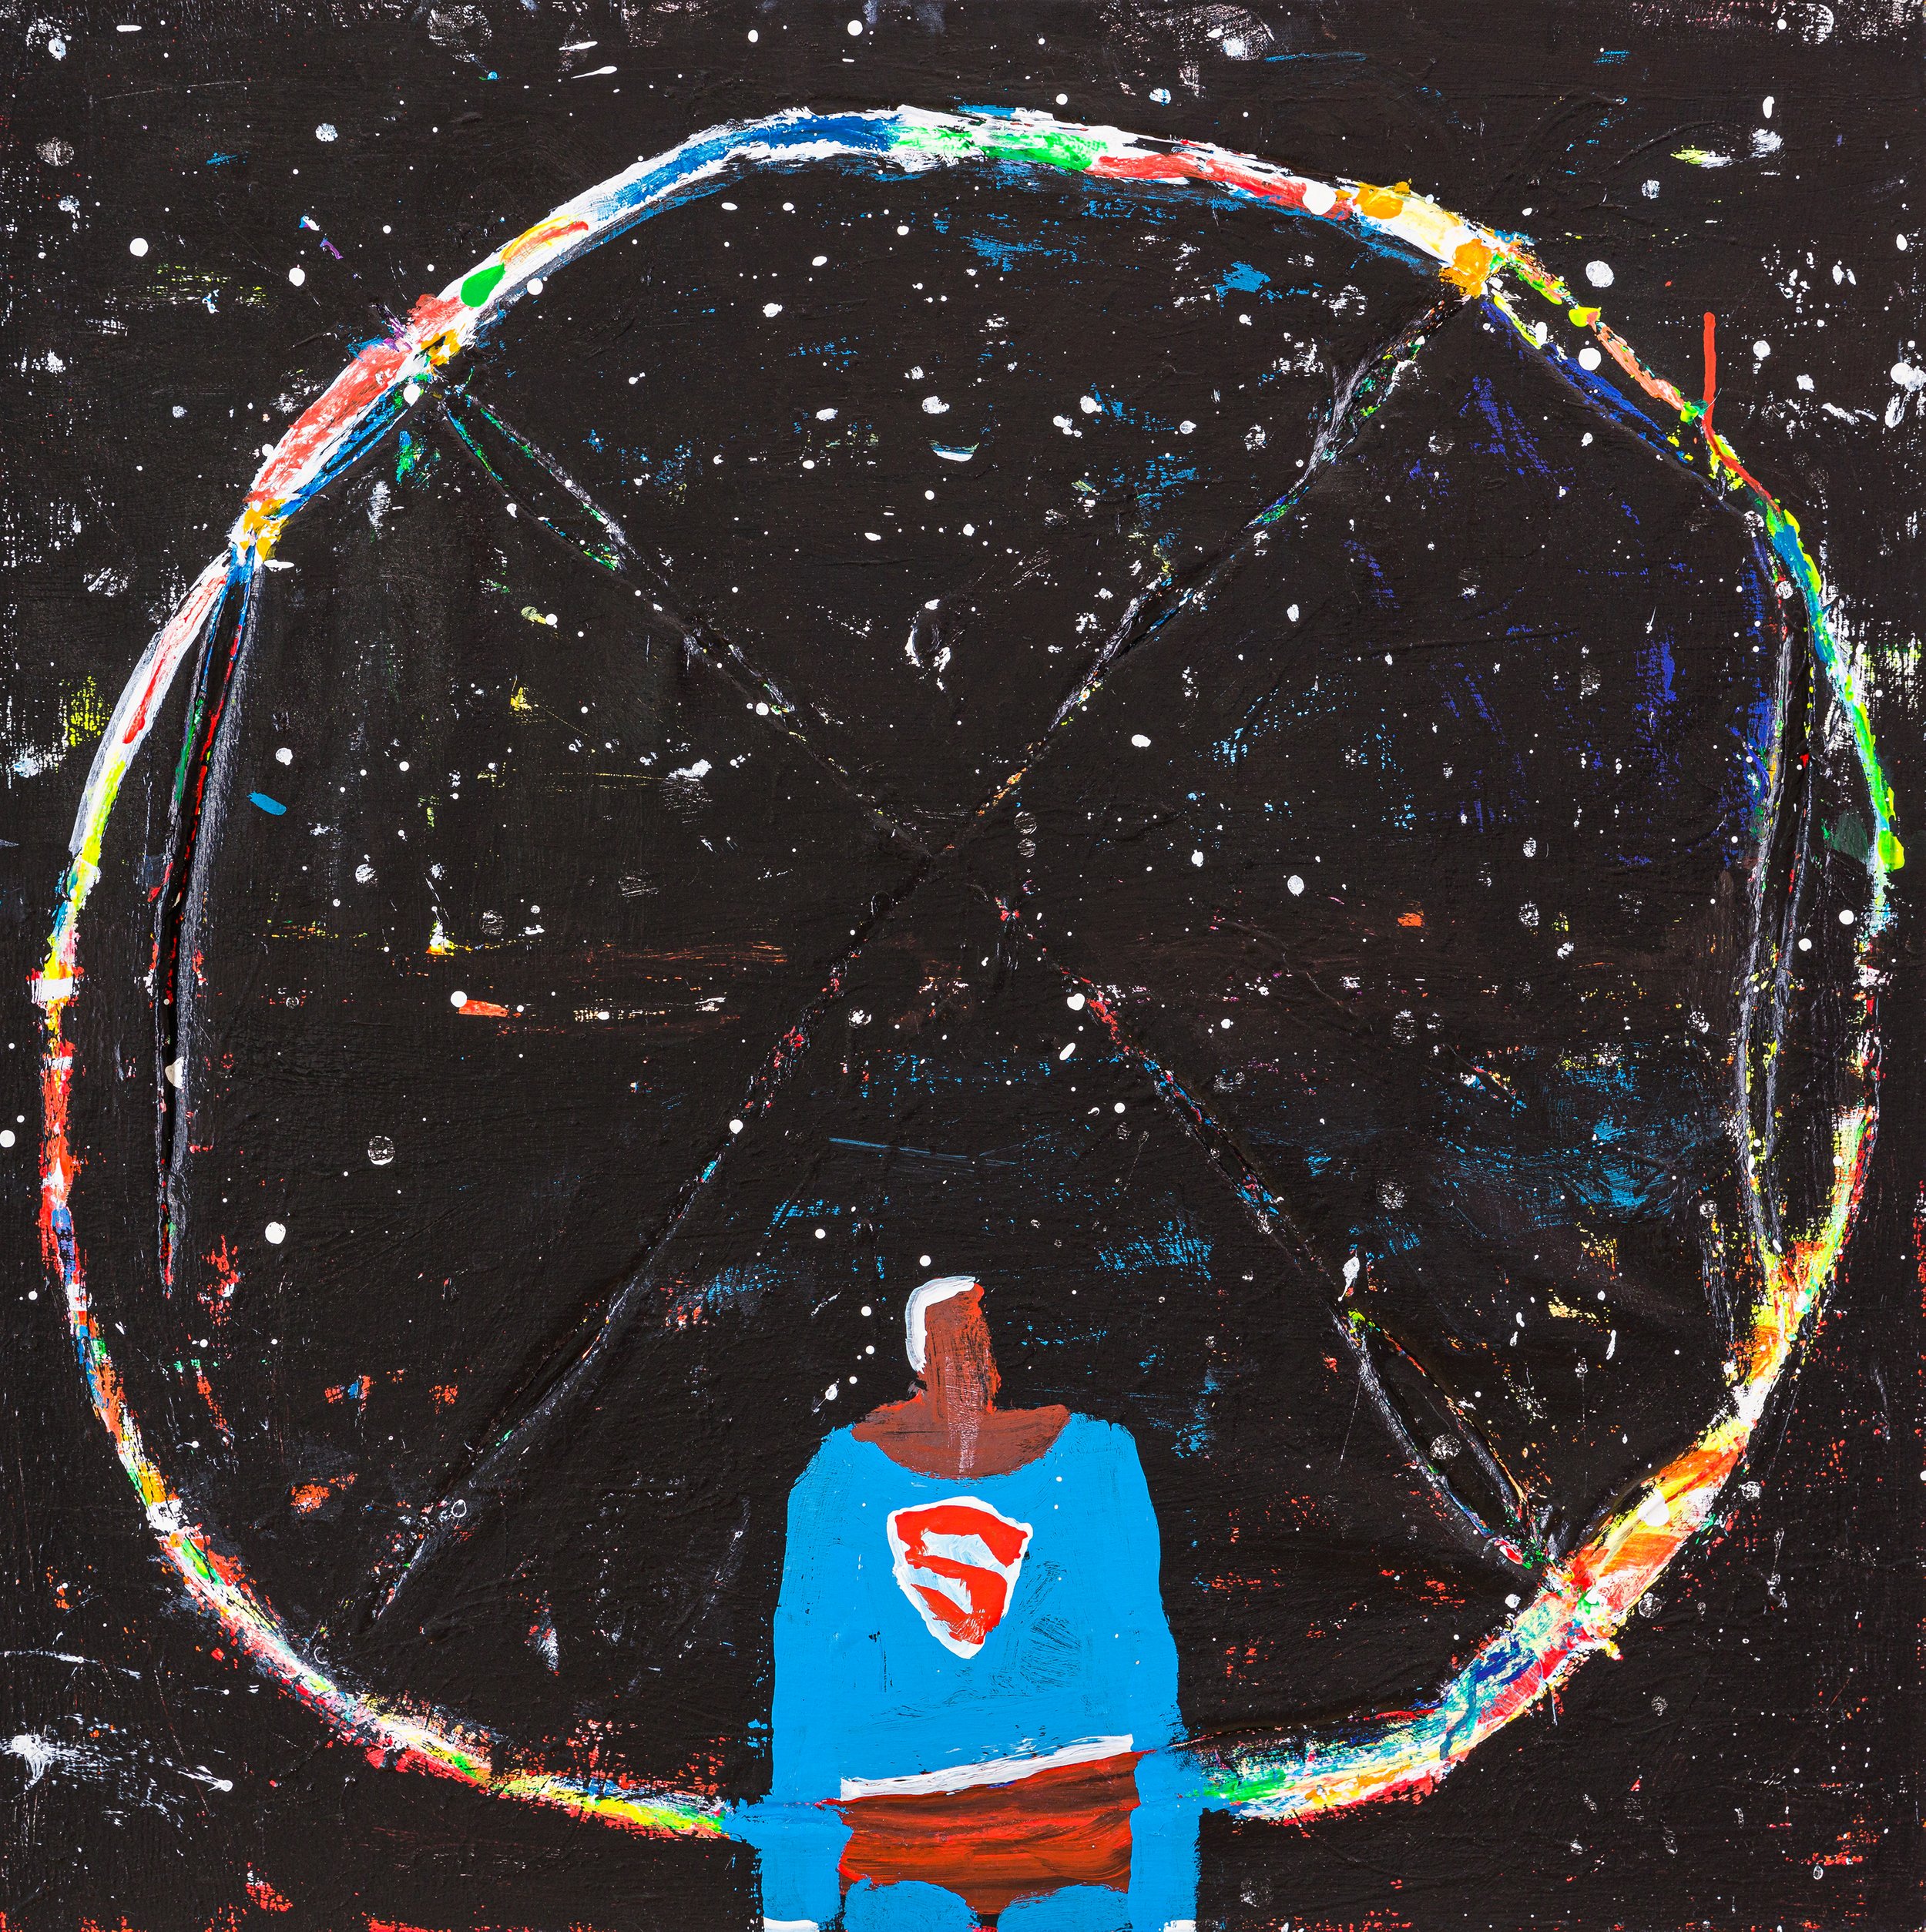  Katherine Bradford (United States, born 1942),  Superman Big Circle of the Universe,  2015, oil on canvas, 36 x 36 inches. Collection of Michael Sherman © Katherine Bradford. Image courtesy Silvia Ros Photography  